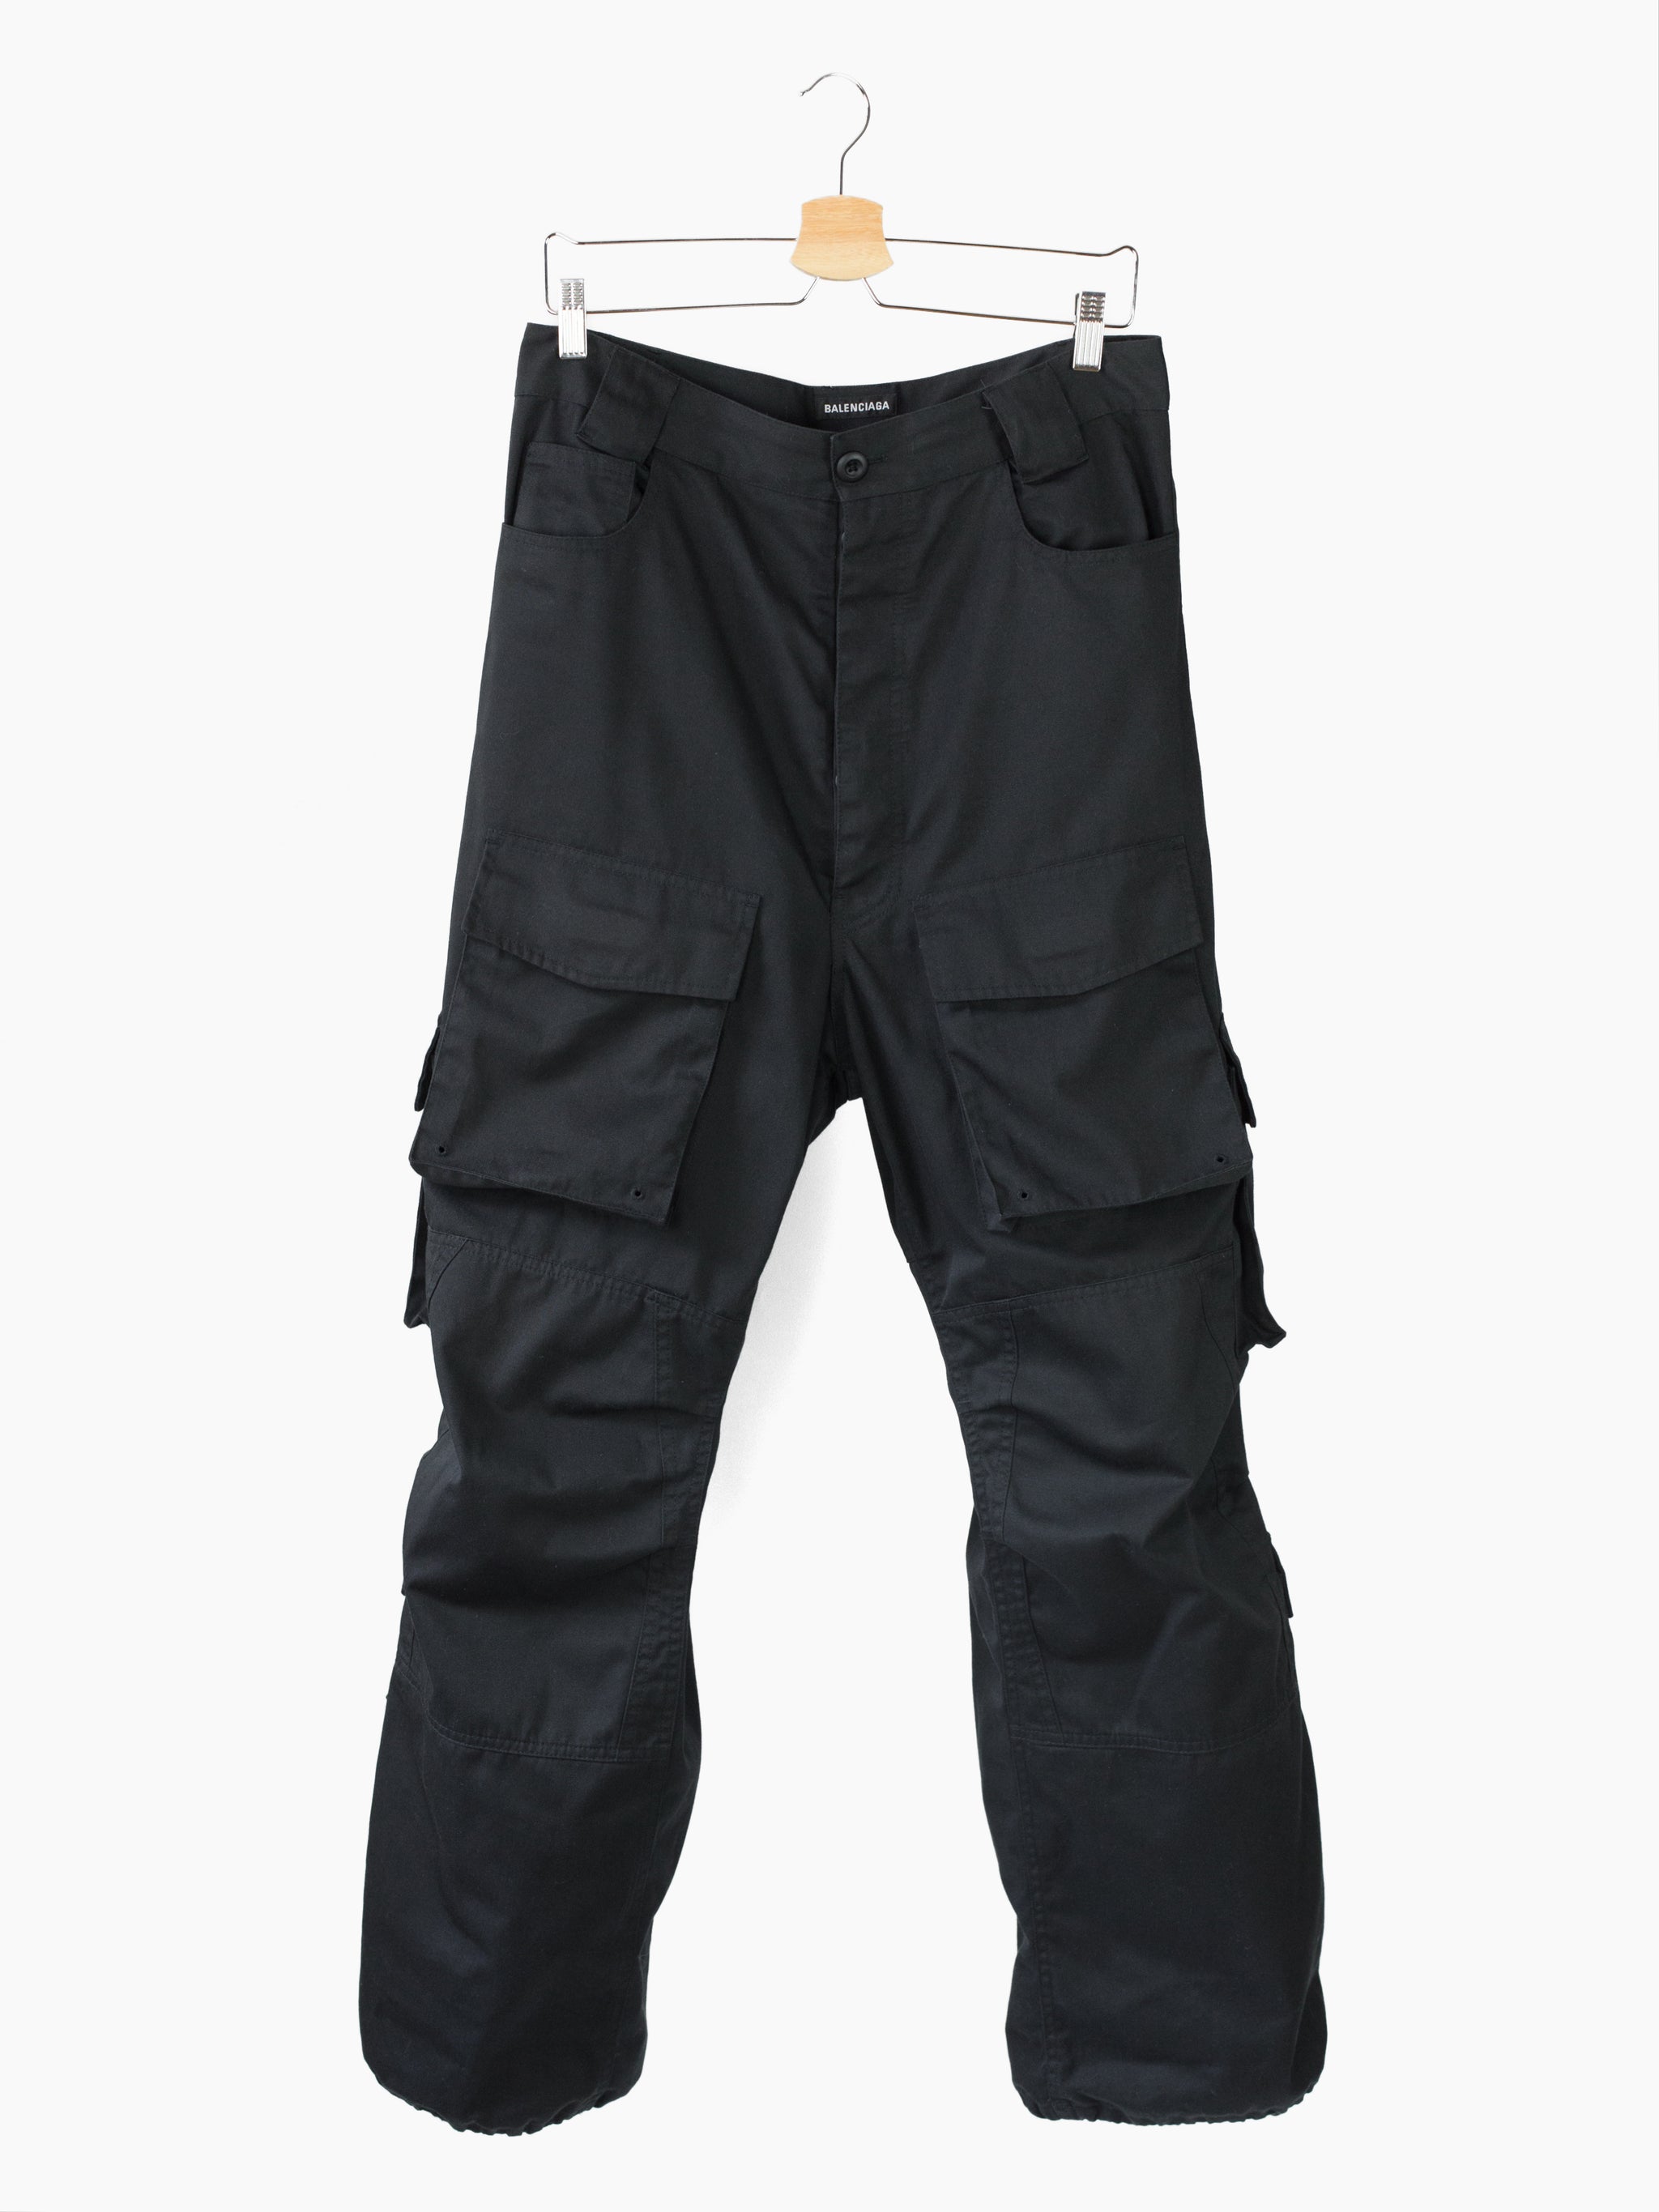 Dropship Men Multi-Pocket Outdoor Elastic Waist Cargo Pants to Sell Online  at a Lower Price | Doba